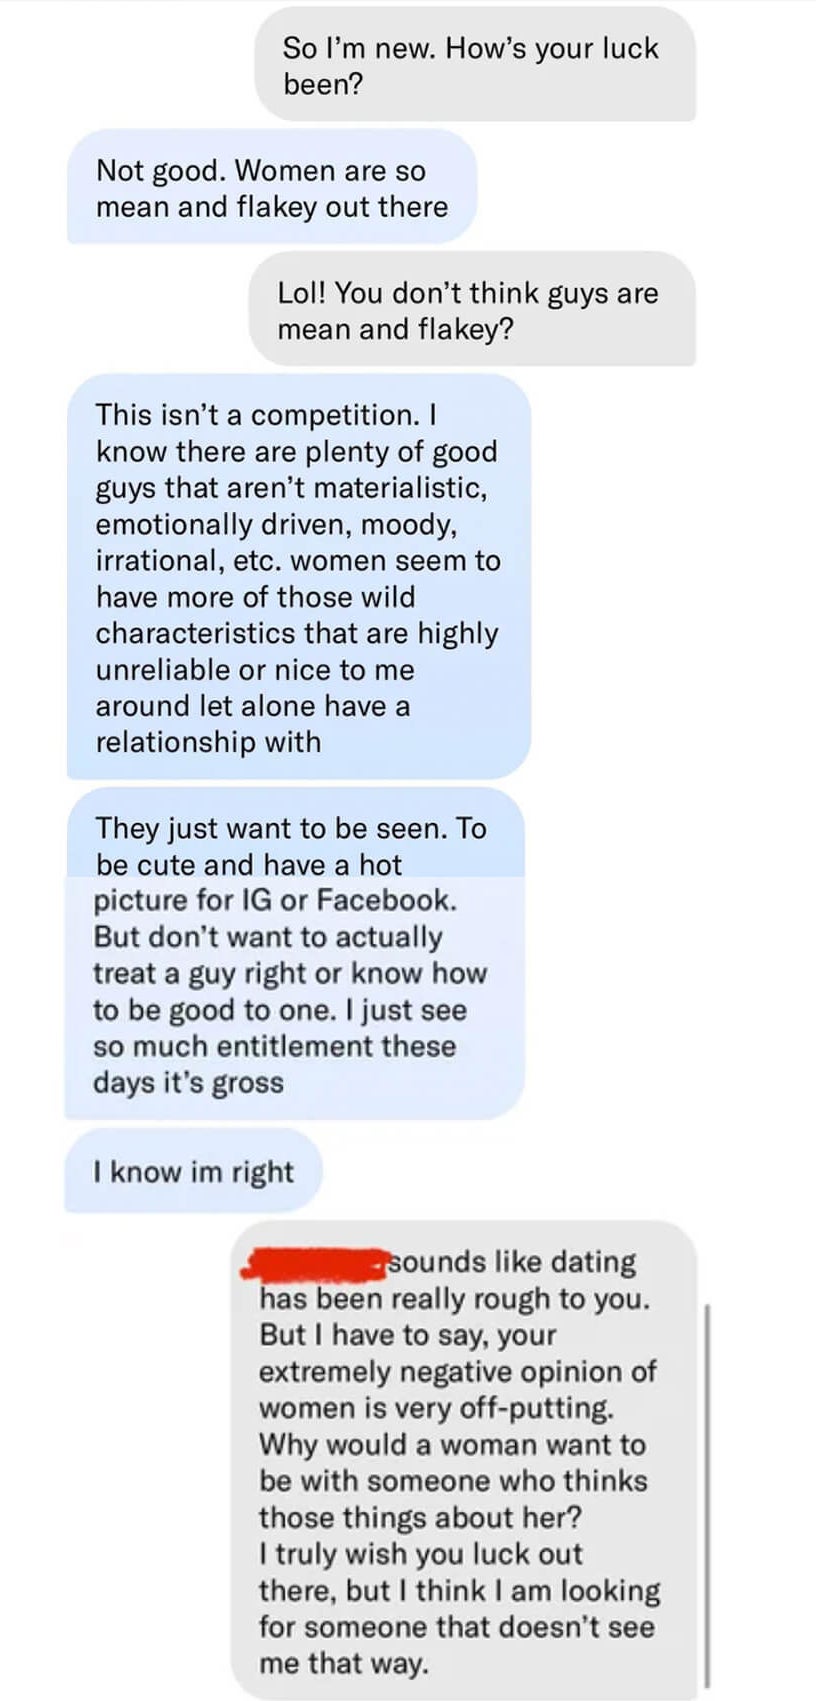 dating app messages where a guy calls girls mean and flakey saying guys are good and not materialistic while women are wild and unreliable and just want pictures for instagram. the woman then rejects him